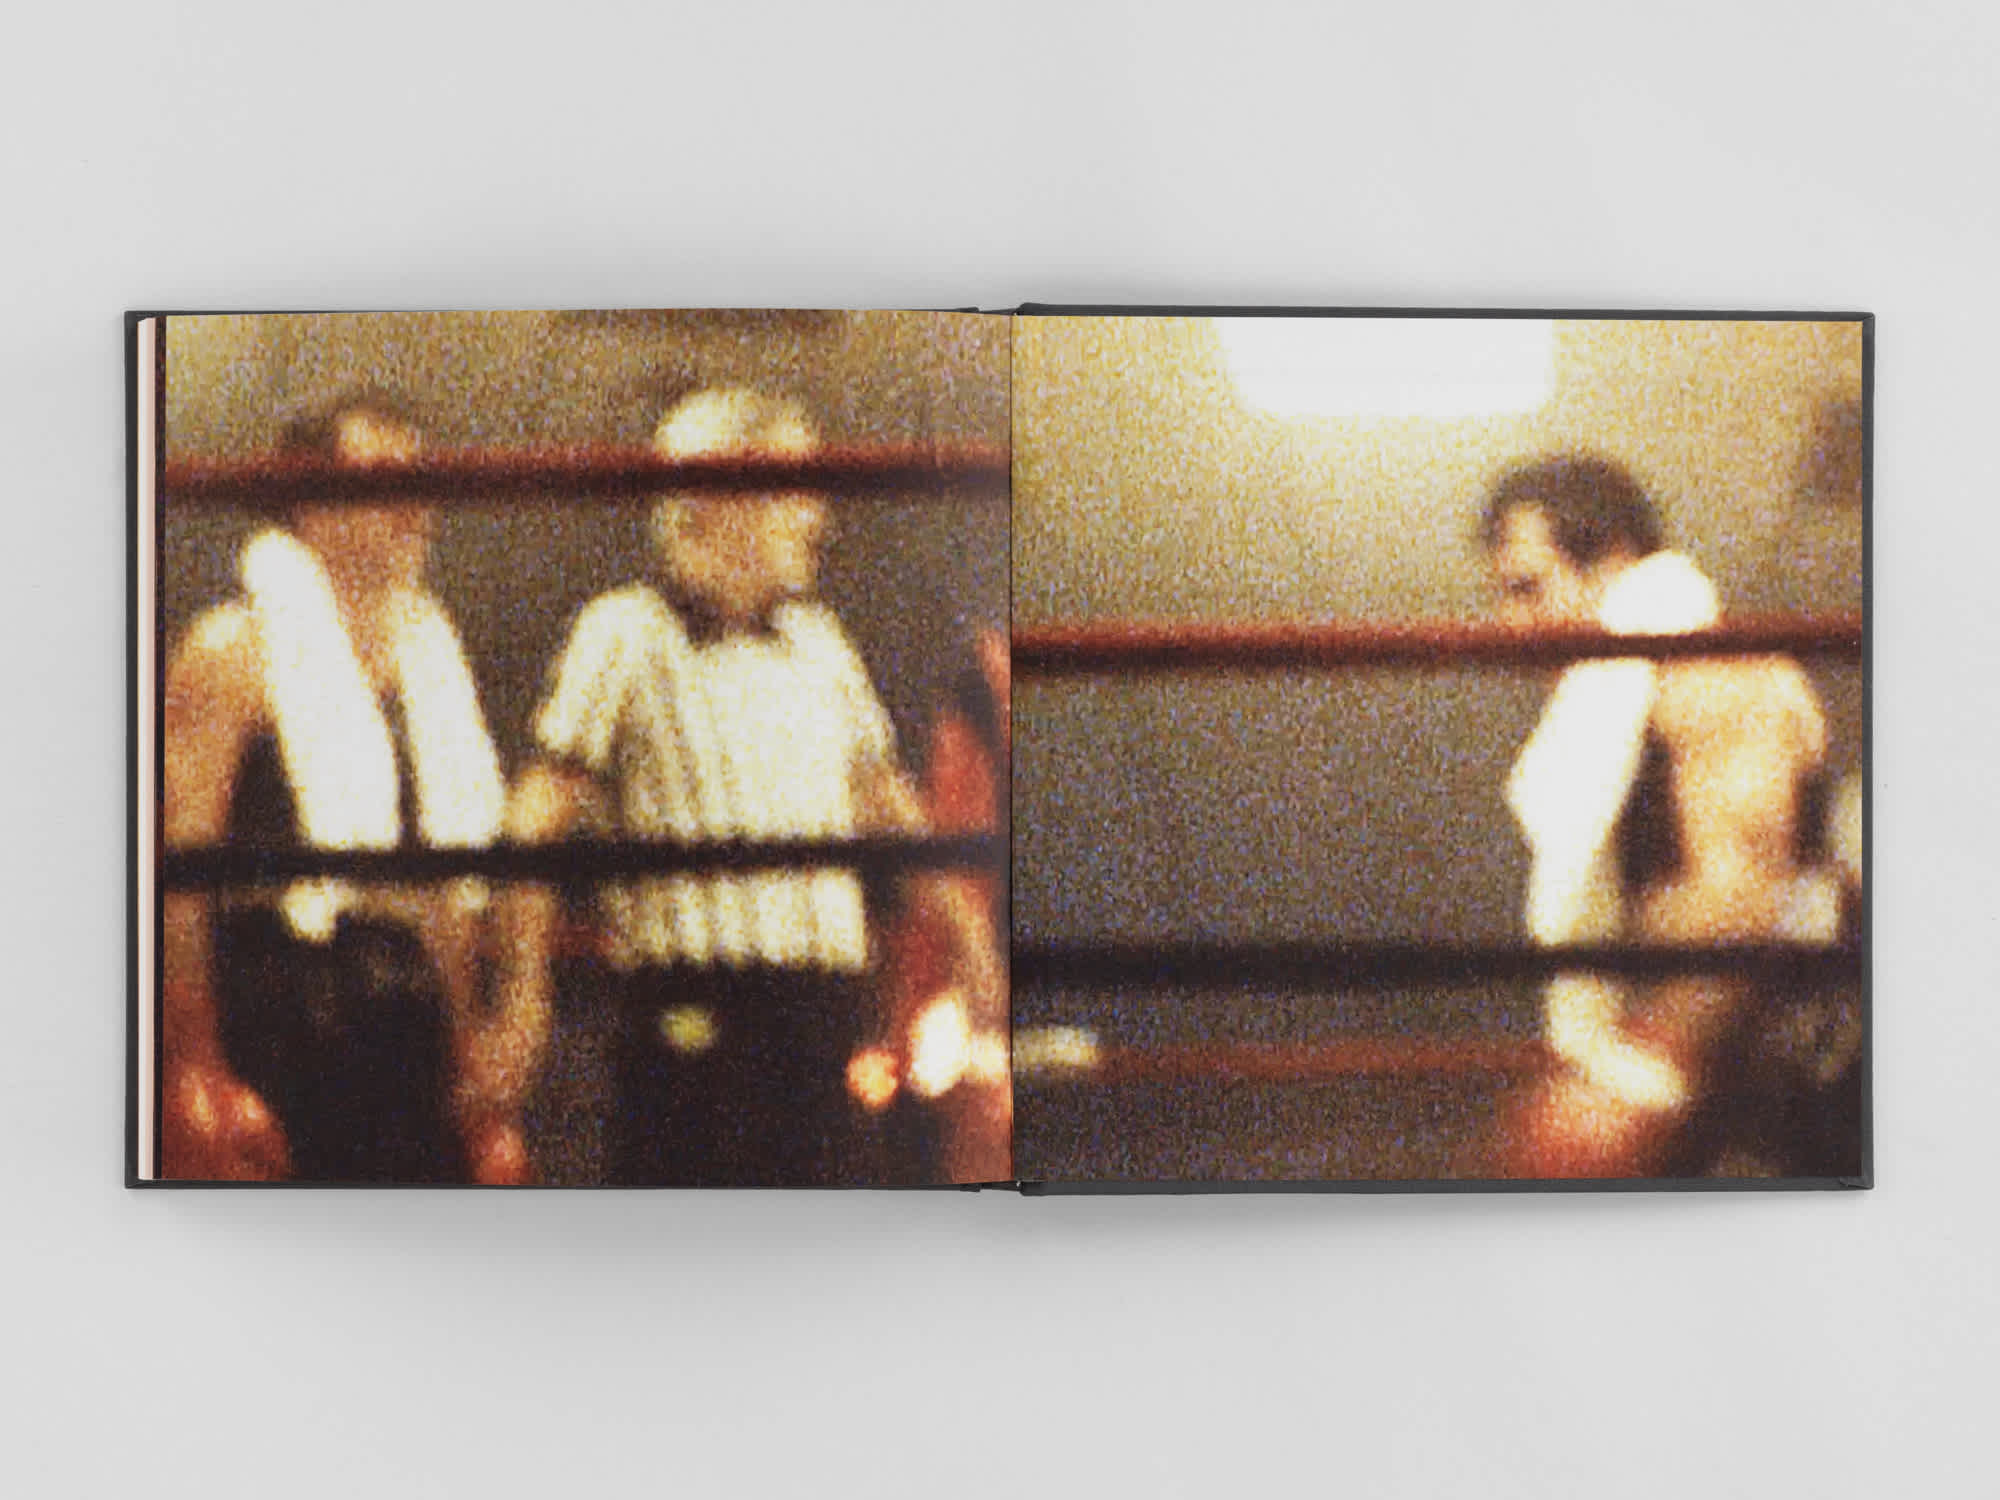 Open book with a grainy, full-bleed photograph of two boxers and a referee in the ring.